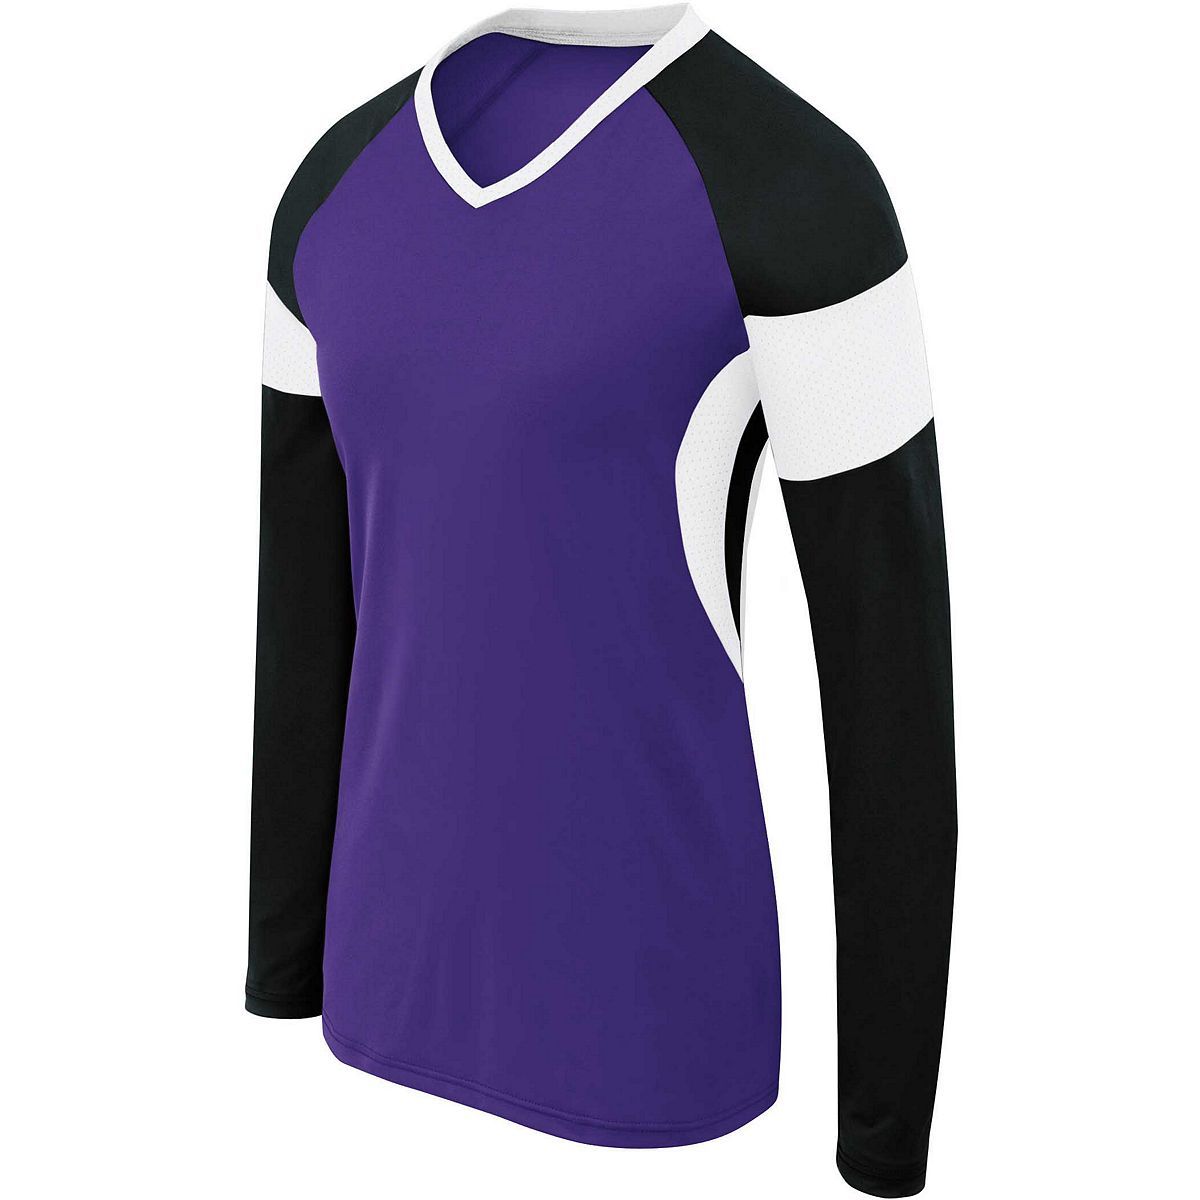 High 5 Ladies Long Sleeve Raptor Jersey in Purple/Black/White  -Part of the Ladies, Ladies-Jersey, High5-Products, Volleyball, Shirts product lines at KanaleyCreations.com